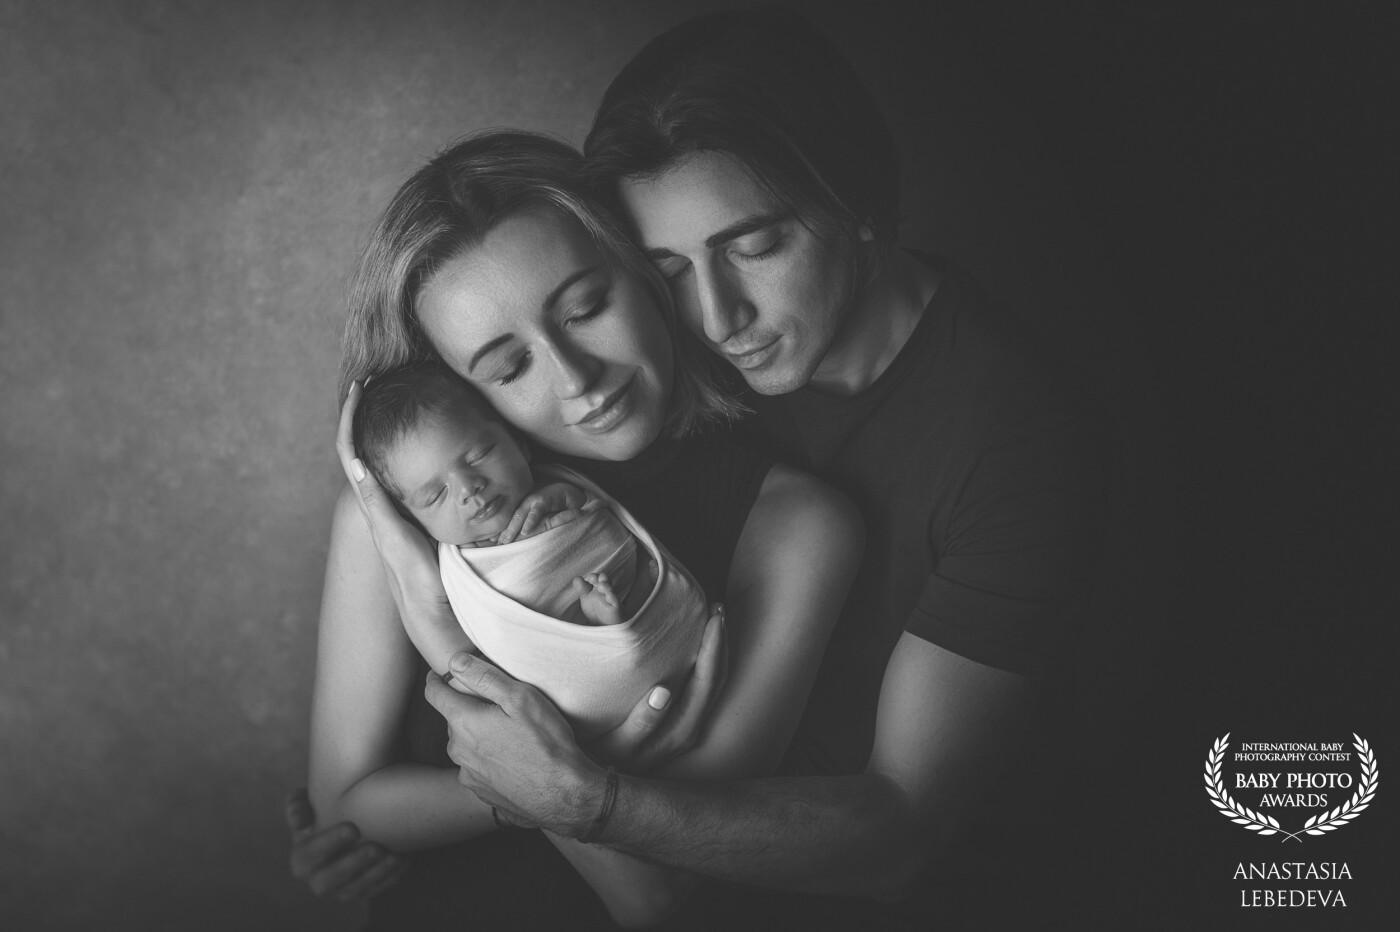 The most tender couple Natalie and Murad Osman. And their joint photo. Happy parents with newborn son Solomon. This was an amazing photo shoot. We got a lot of beautiful shots.